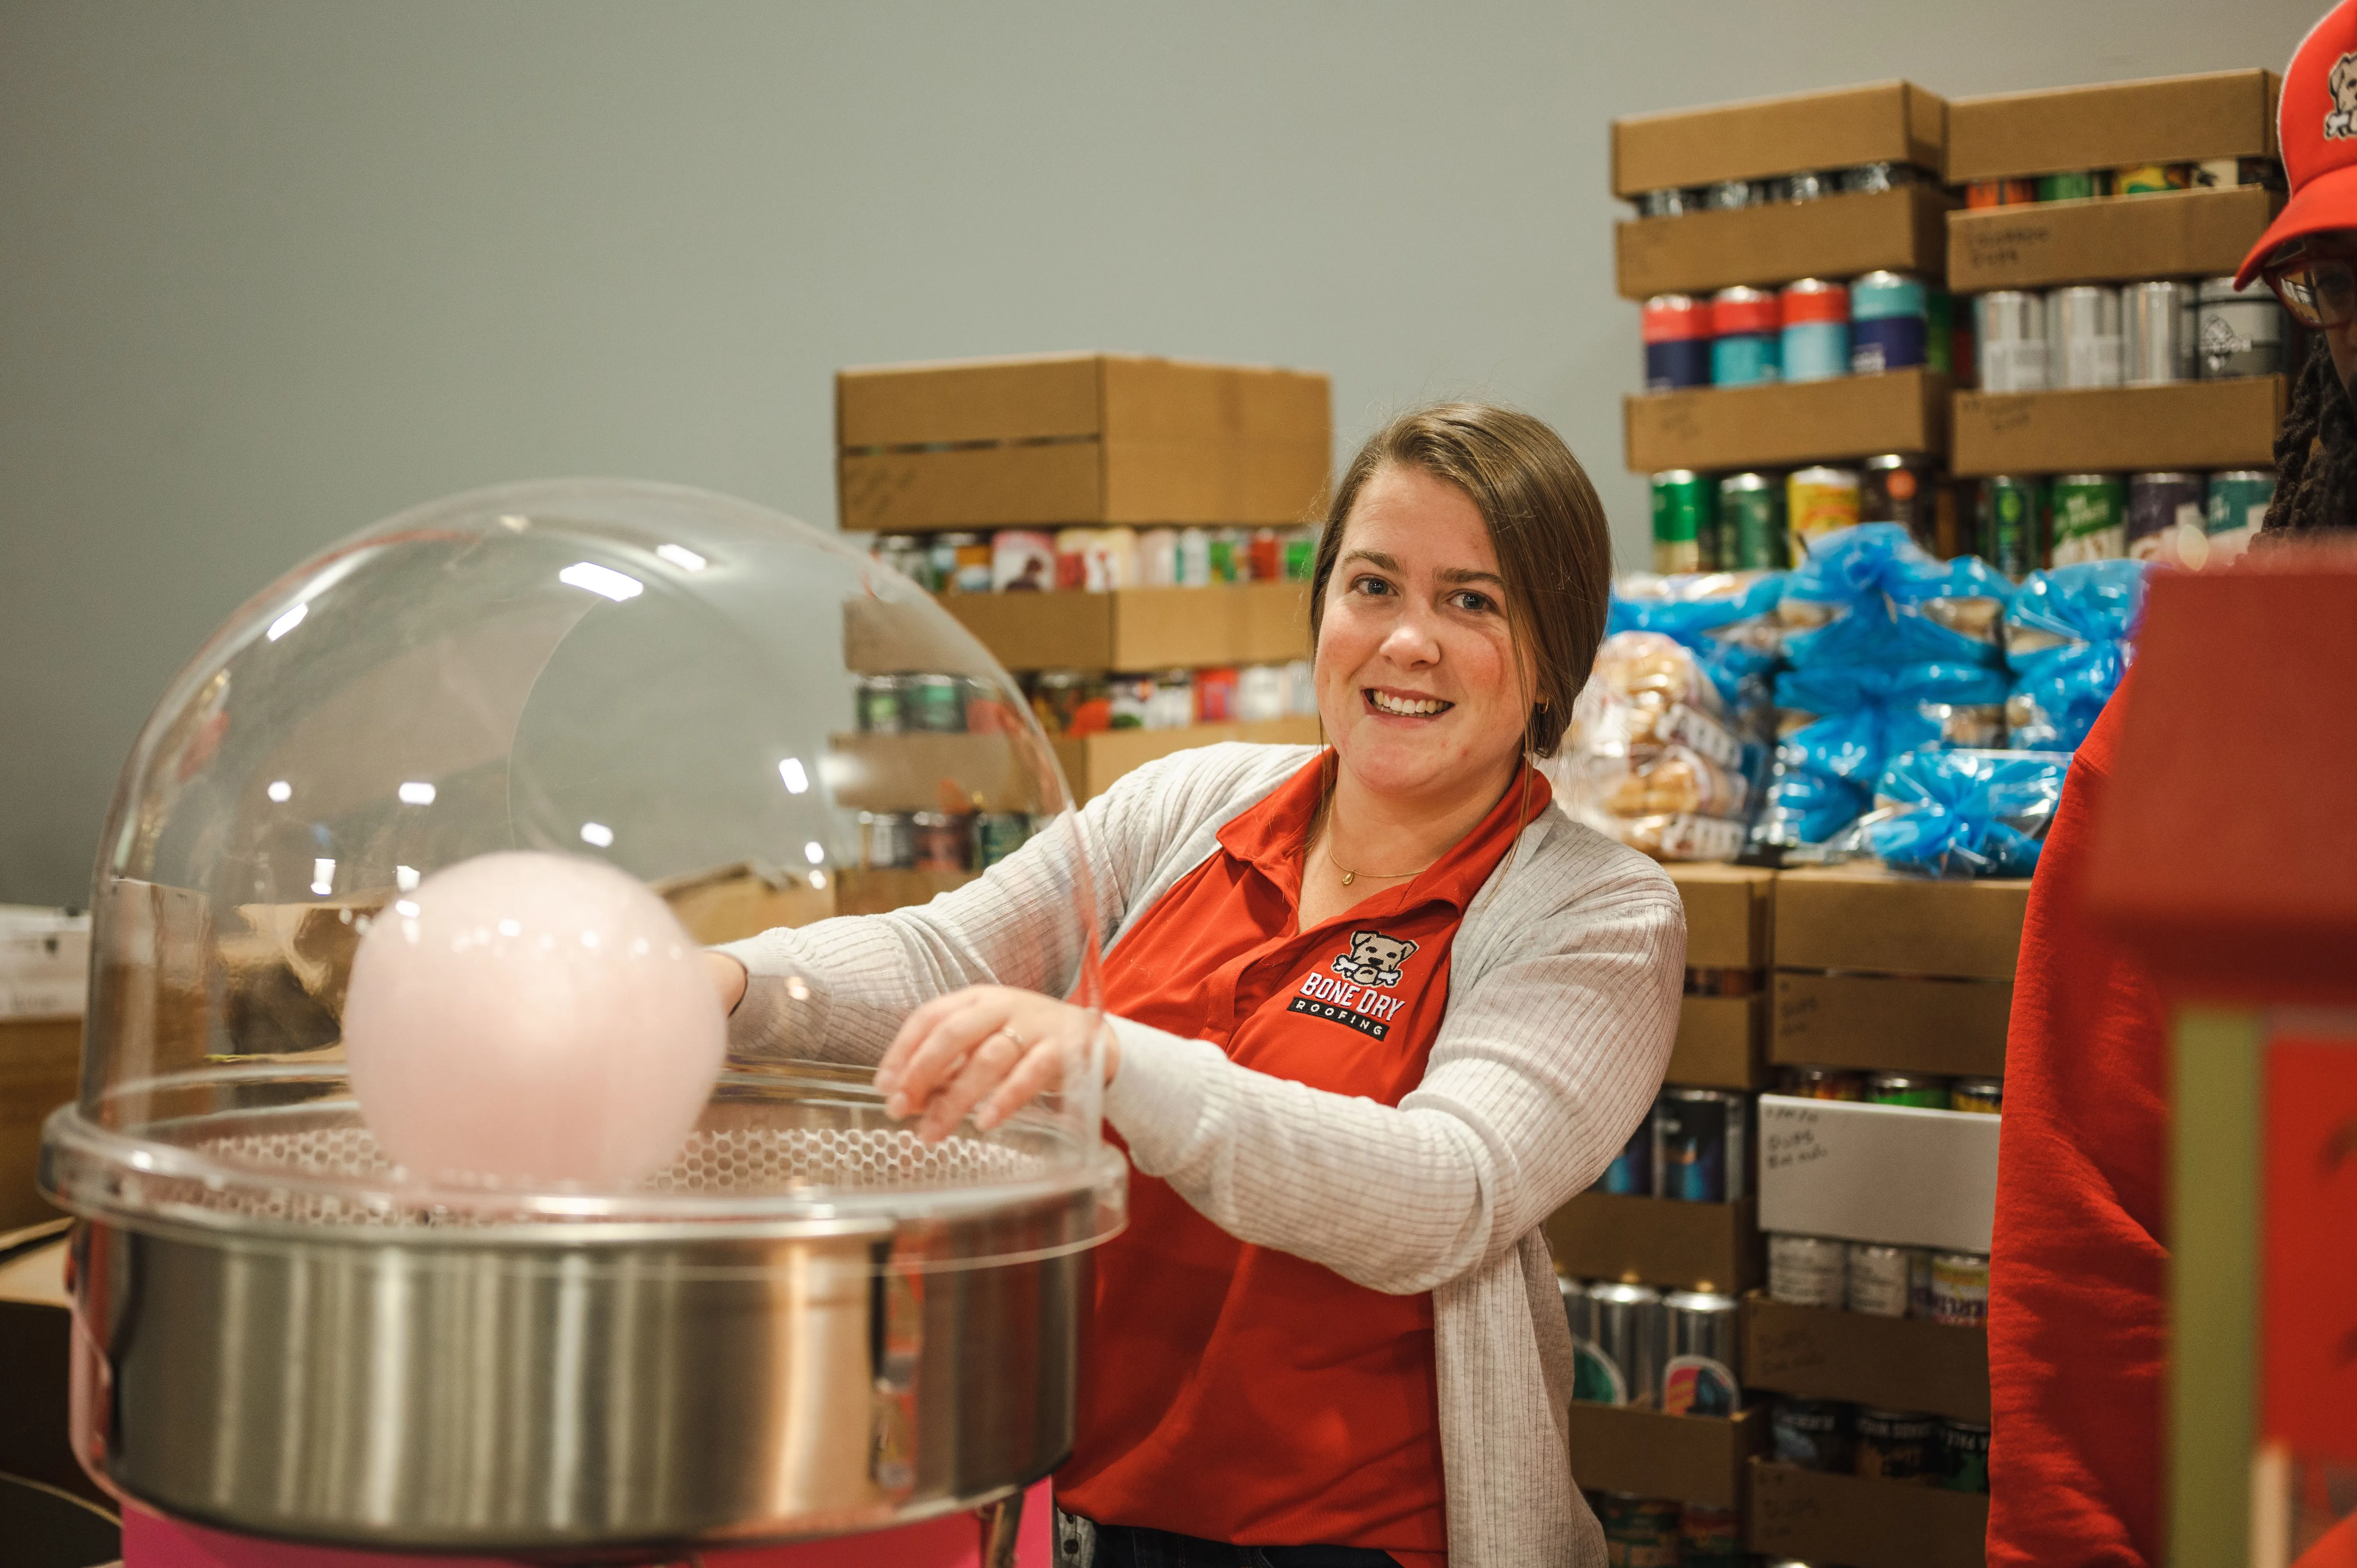 Smiling woman in a red apron making cotton candy at a concession stand with shelves of supplies in the background.